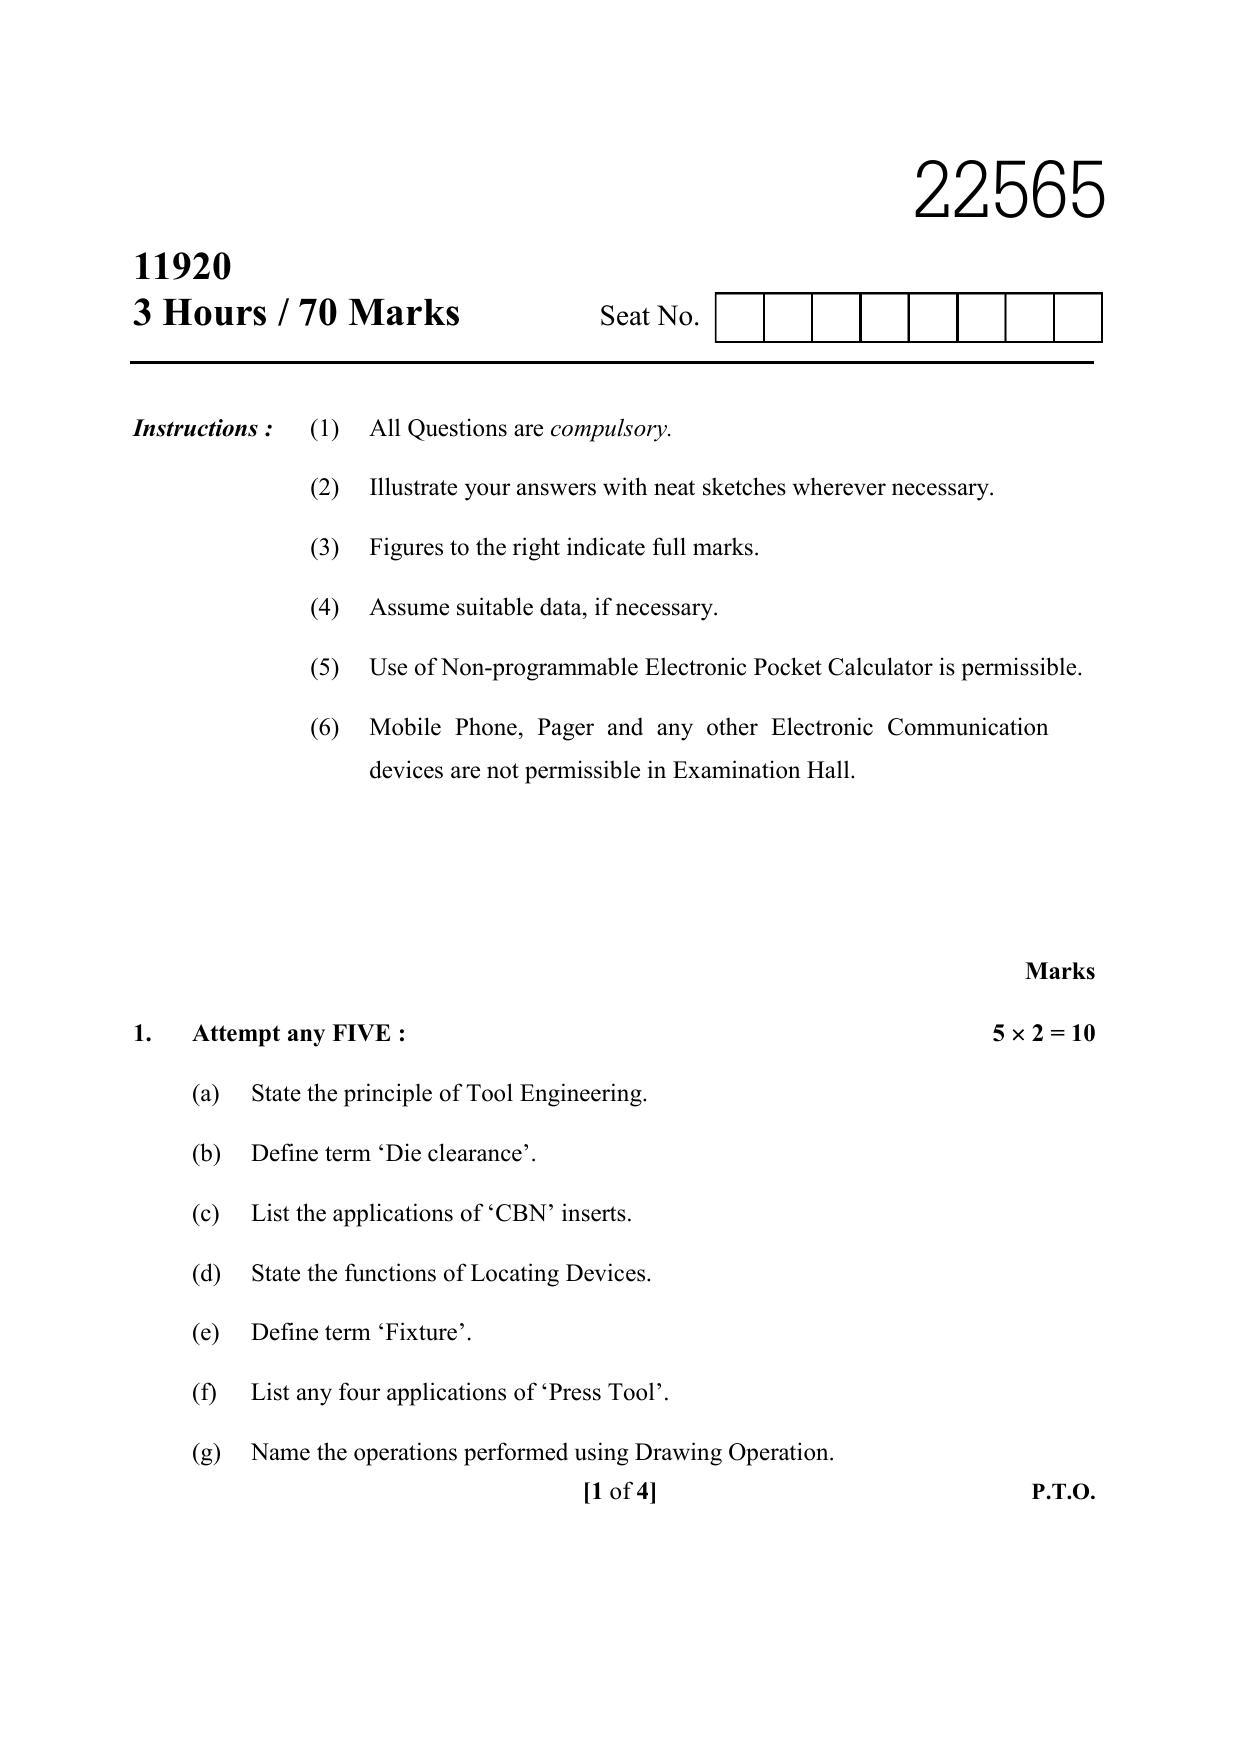 MSBTE Question Paper - 2019 - Tool Engineering (Elective) - Page 1